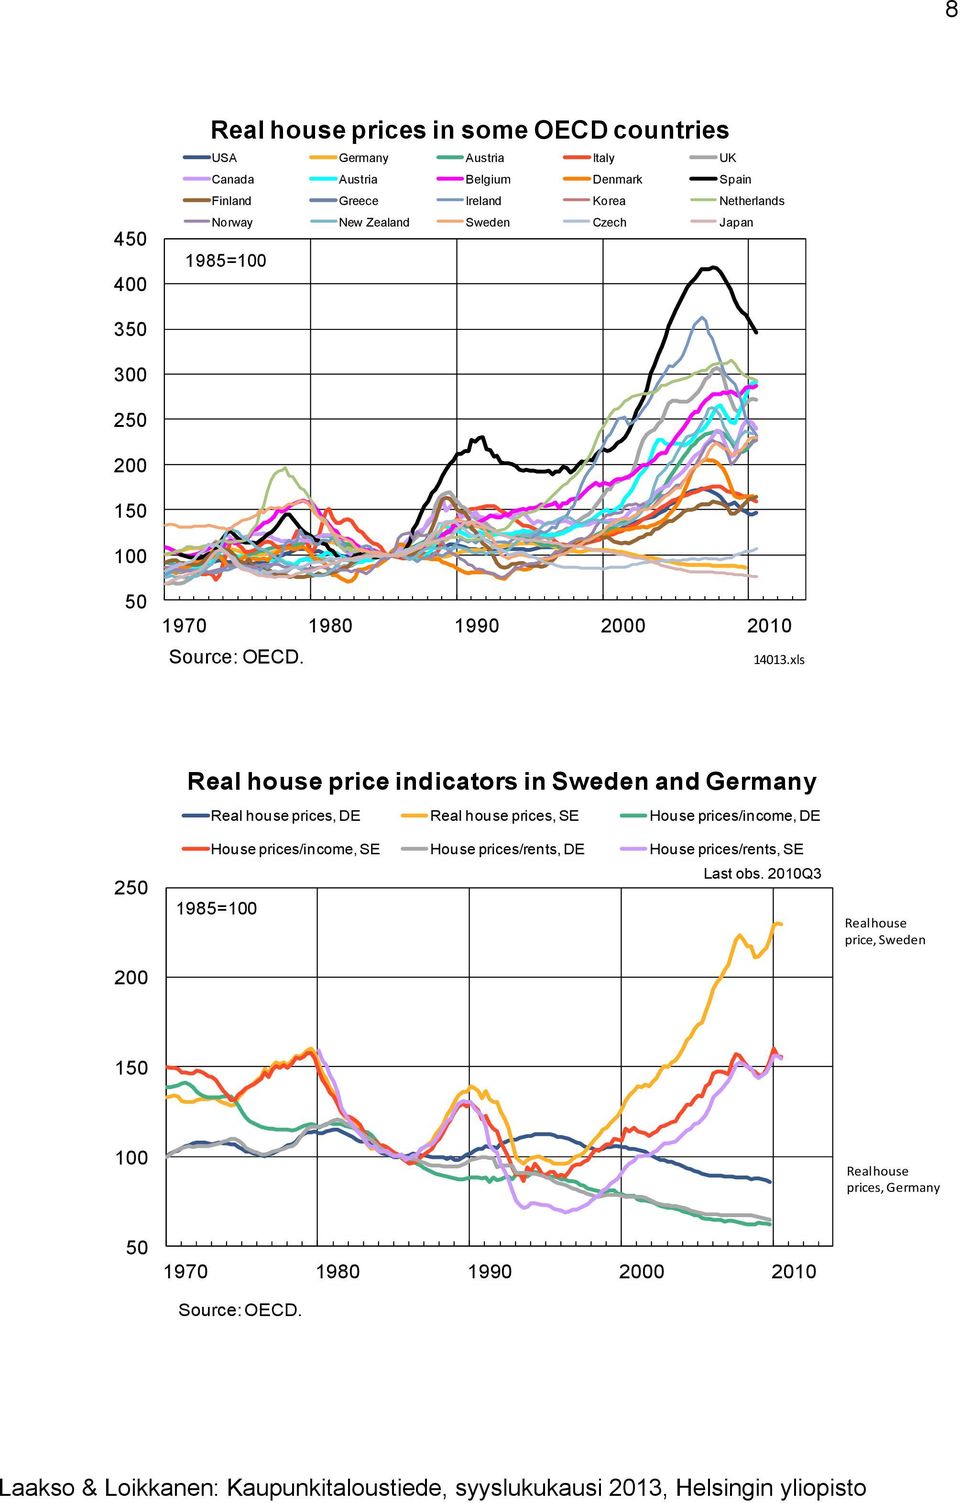 xls 25 2 Real house price indicators in Sweden and Germany Real house prices, DE Real house prices, SE House prices/income, DE House prices/income, SE House